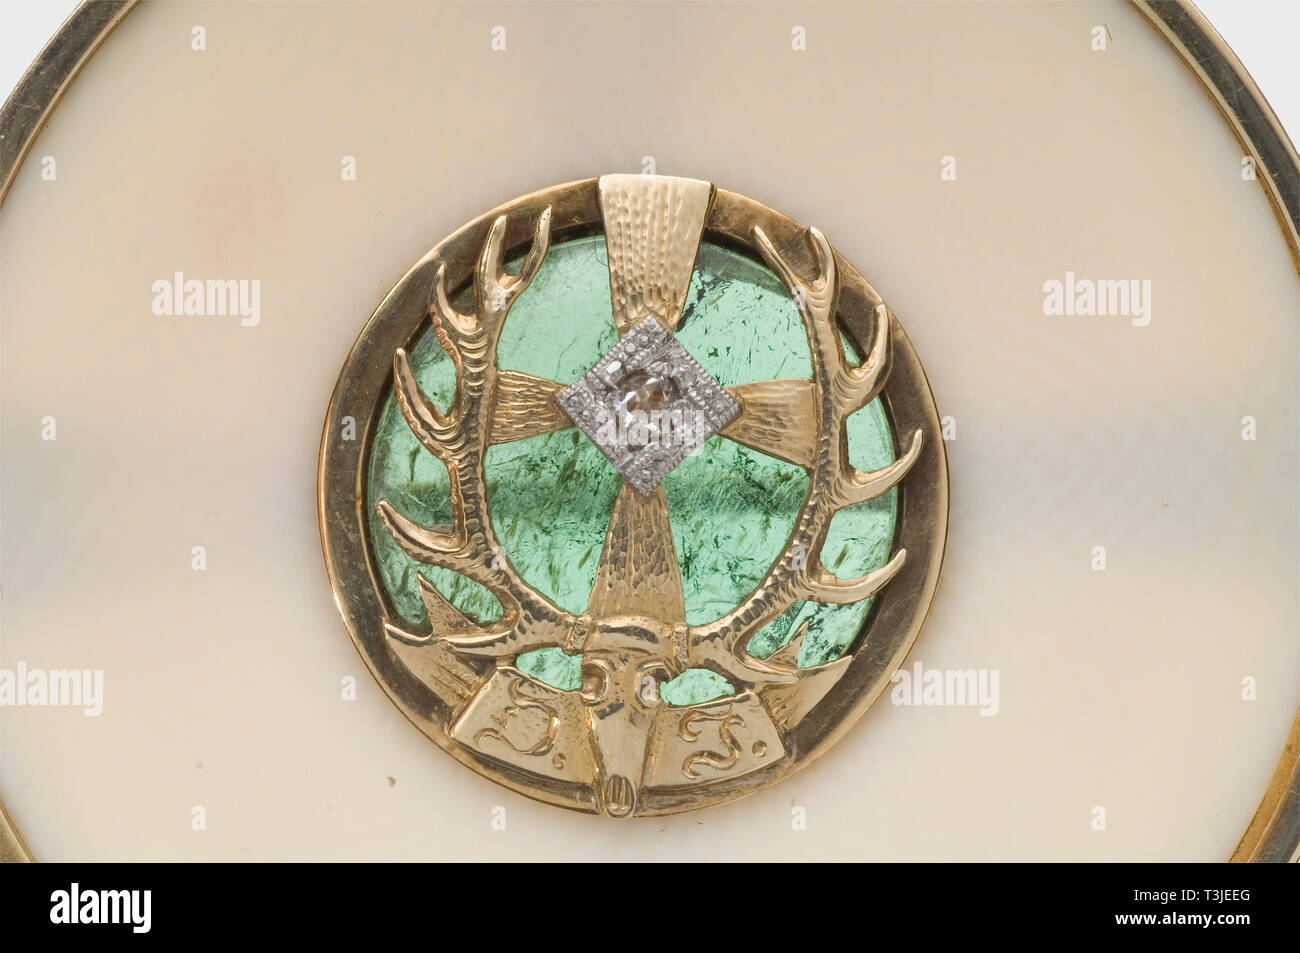 Hermann Göring, House Order of Carinhall Gold, platinum, ivory, diamond, and tourmaline. In the centre an openwork St. Hubert's deer head of gold, with diamond studded swastika and monogram 'D.J.' over tourmaline set à jour. The back with fastening pin. Diameter 43 mm, weight 14.5 g. The monogram refers to the Reichsbund Deutsche Jägerschaft (German Hunting Association), which was subordinate to Hermann Göring as 'Reichsjägermeister' (Master Huntsman of the Reich). The House Order of Carinhall was a hunting order awarded by Hermann Göring in Carinhall to female relatives or, Editorial-Use-Only Stock Photo